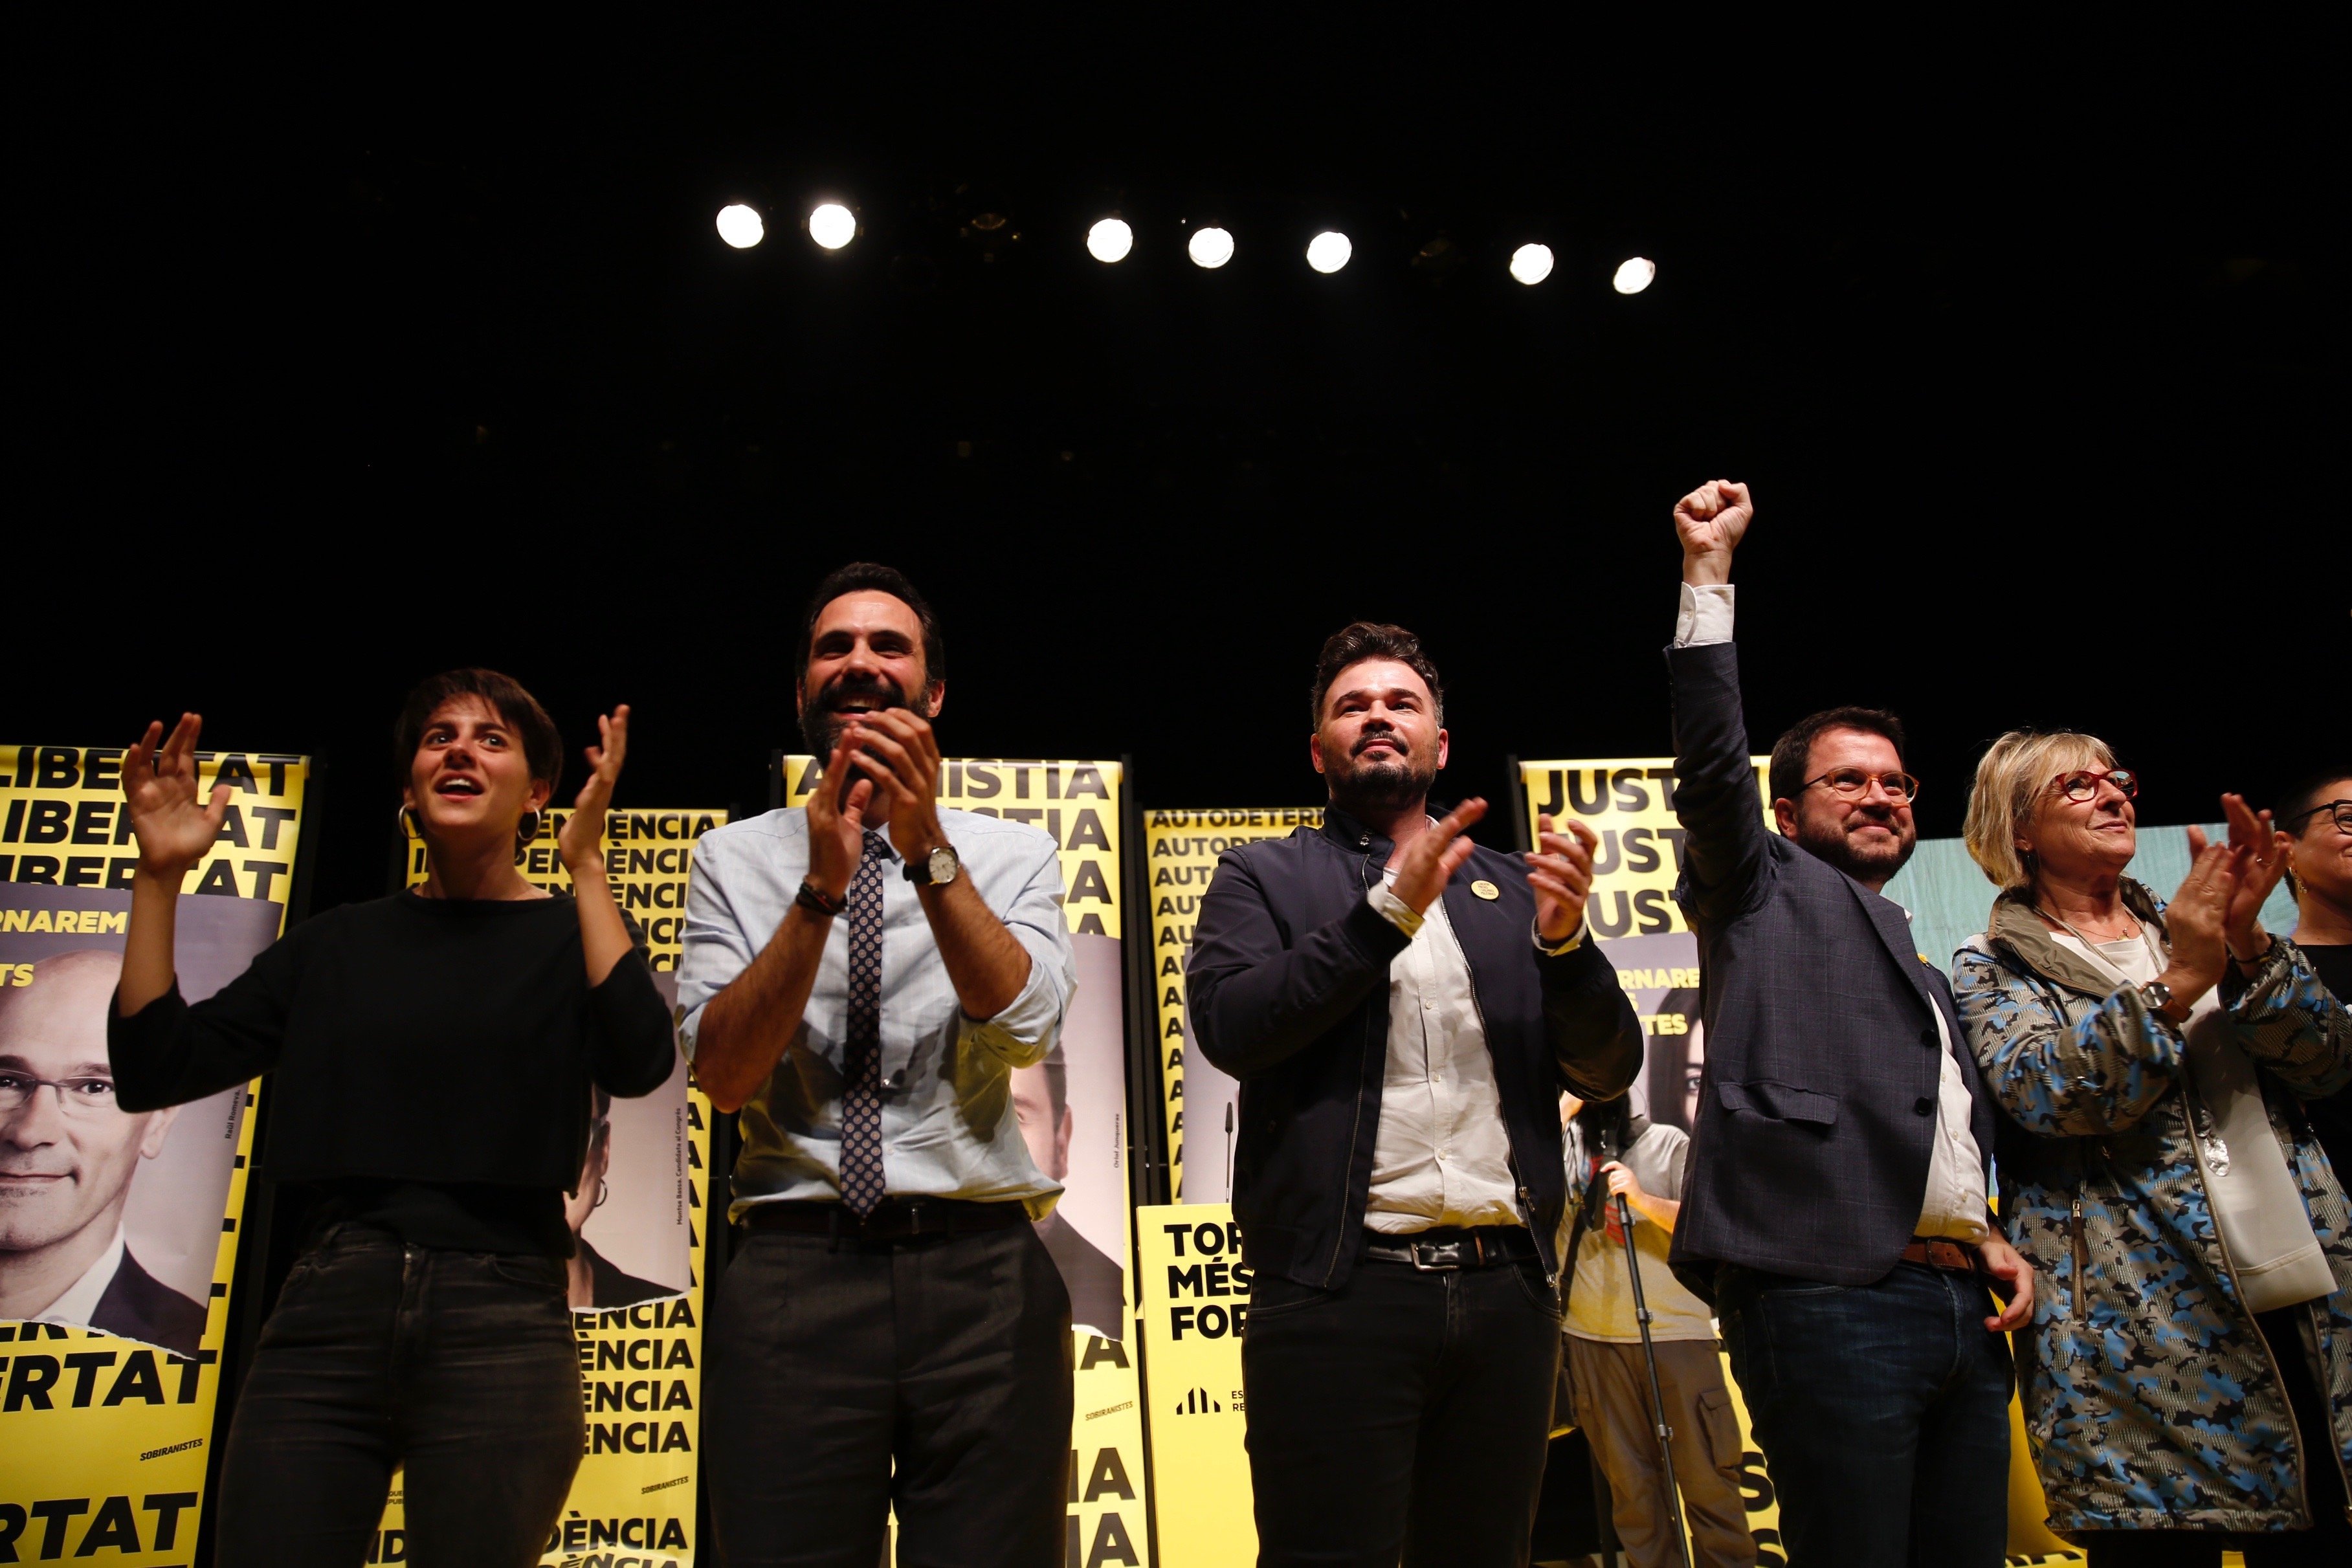 Catalan election poll: ERC to win, with two arithmetic alliances possible